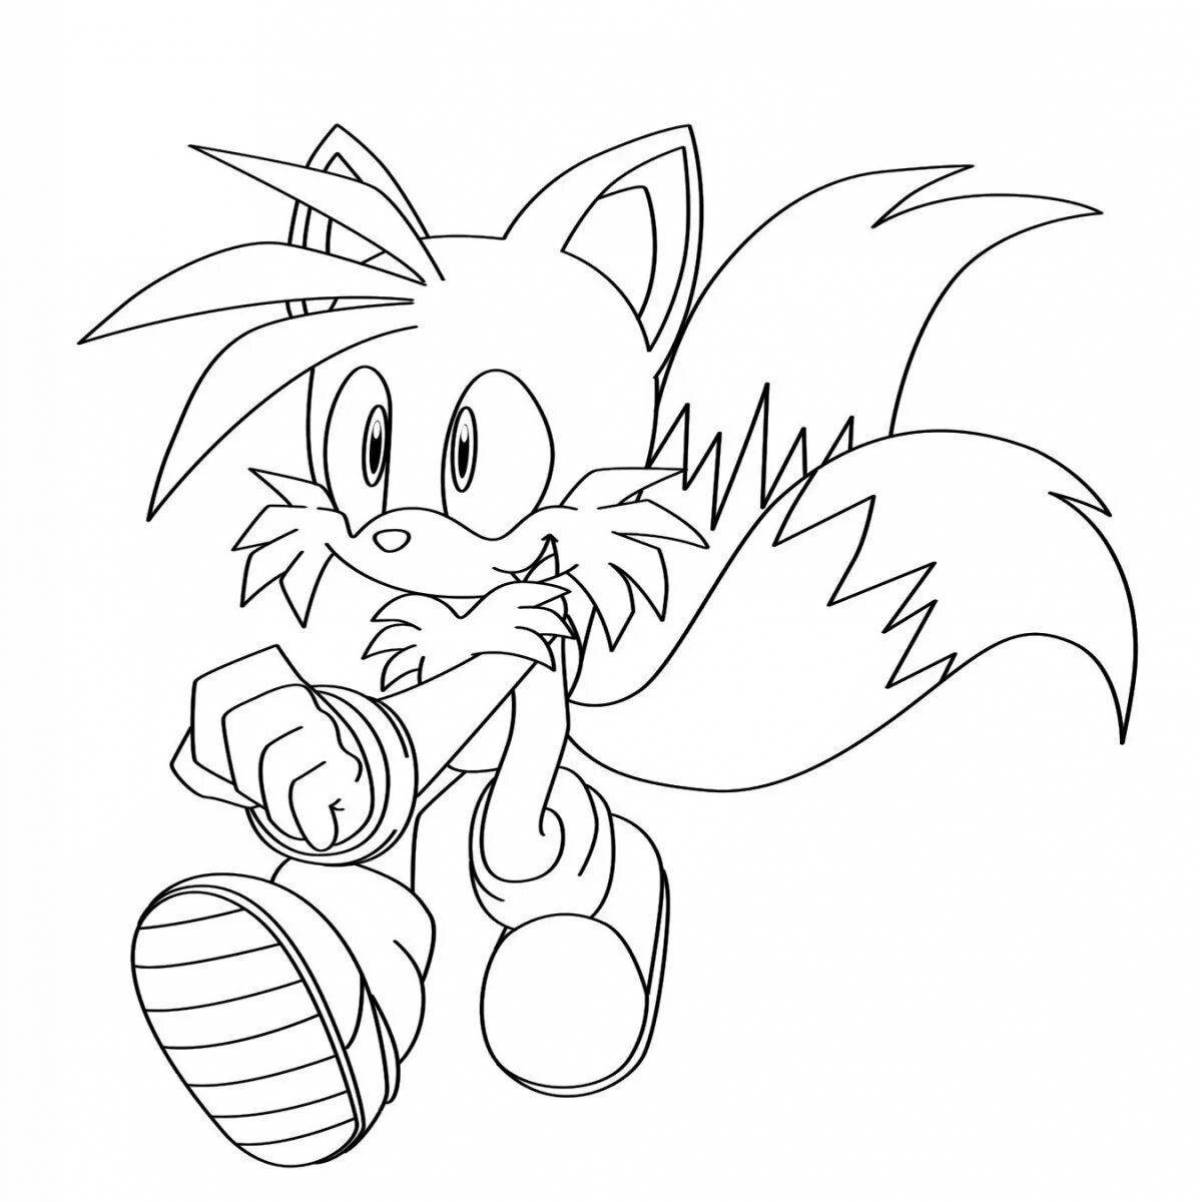 Tails.exe cryptic coloring